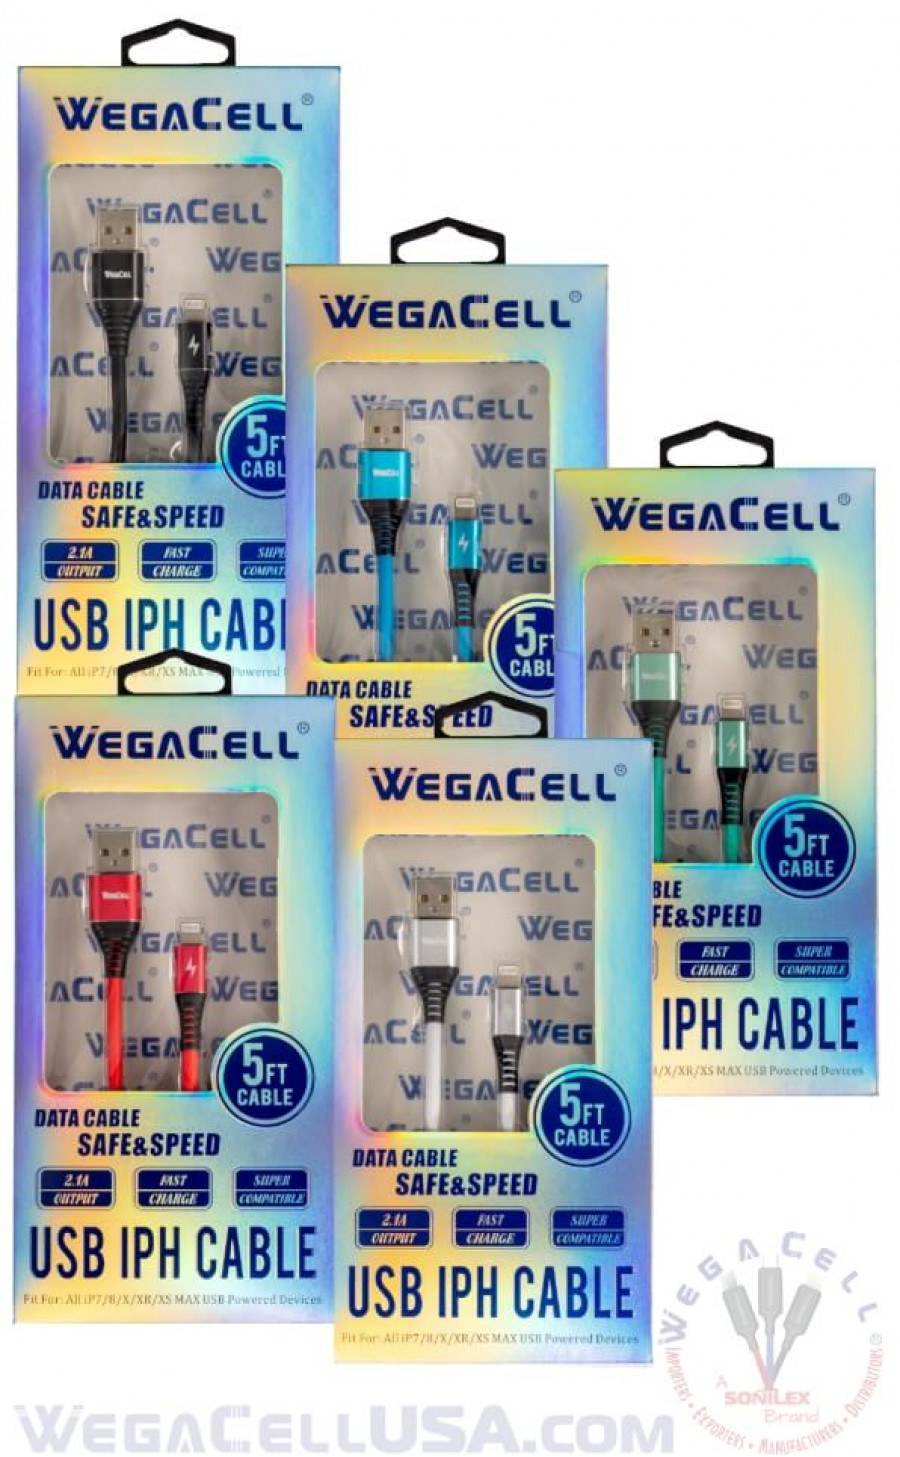 apple compatible fast charging 5 ft lightning tpe data cable - wholesale pkg. wegacell: wl-5cbl12-iph data cable 28